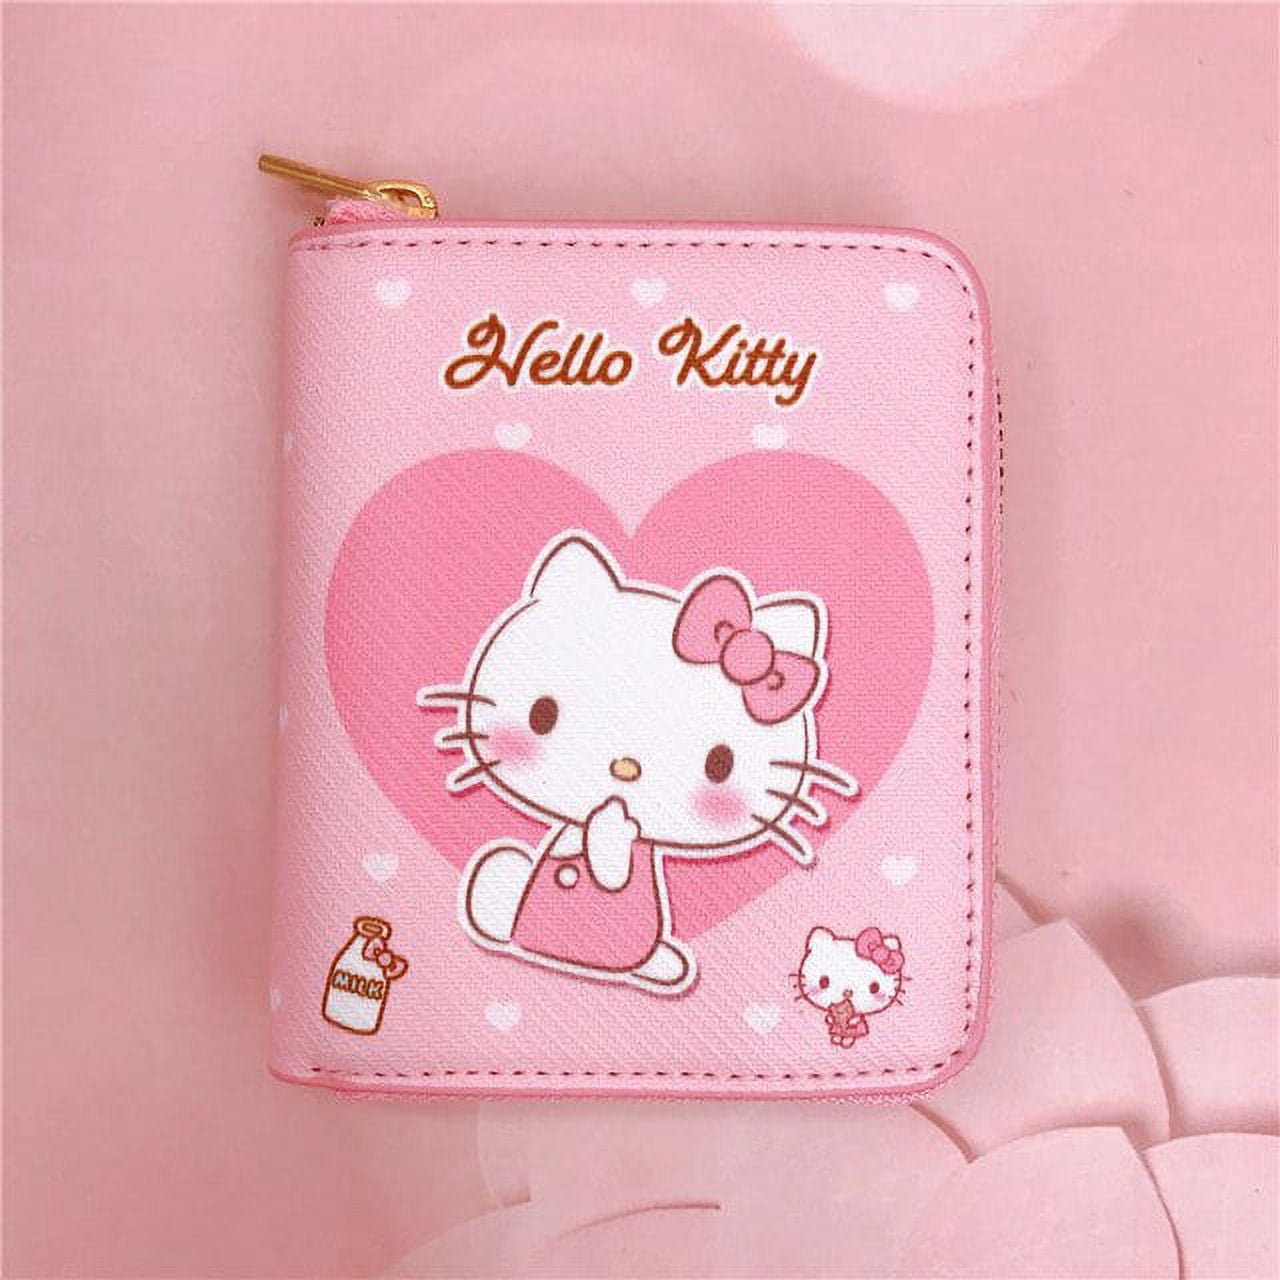 Obsessed with Hello Kitty Kiss-Lock Coin Purse! 🙈😆👛👛👛♥️♥️♥️ : r/ HelloKitty